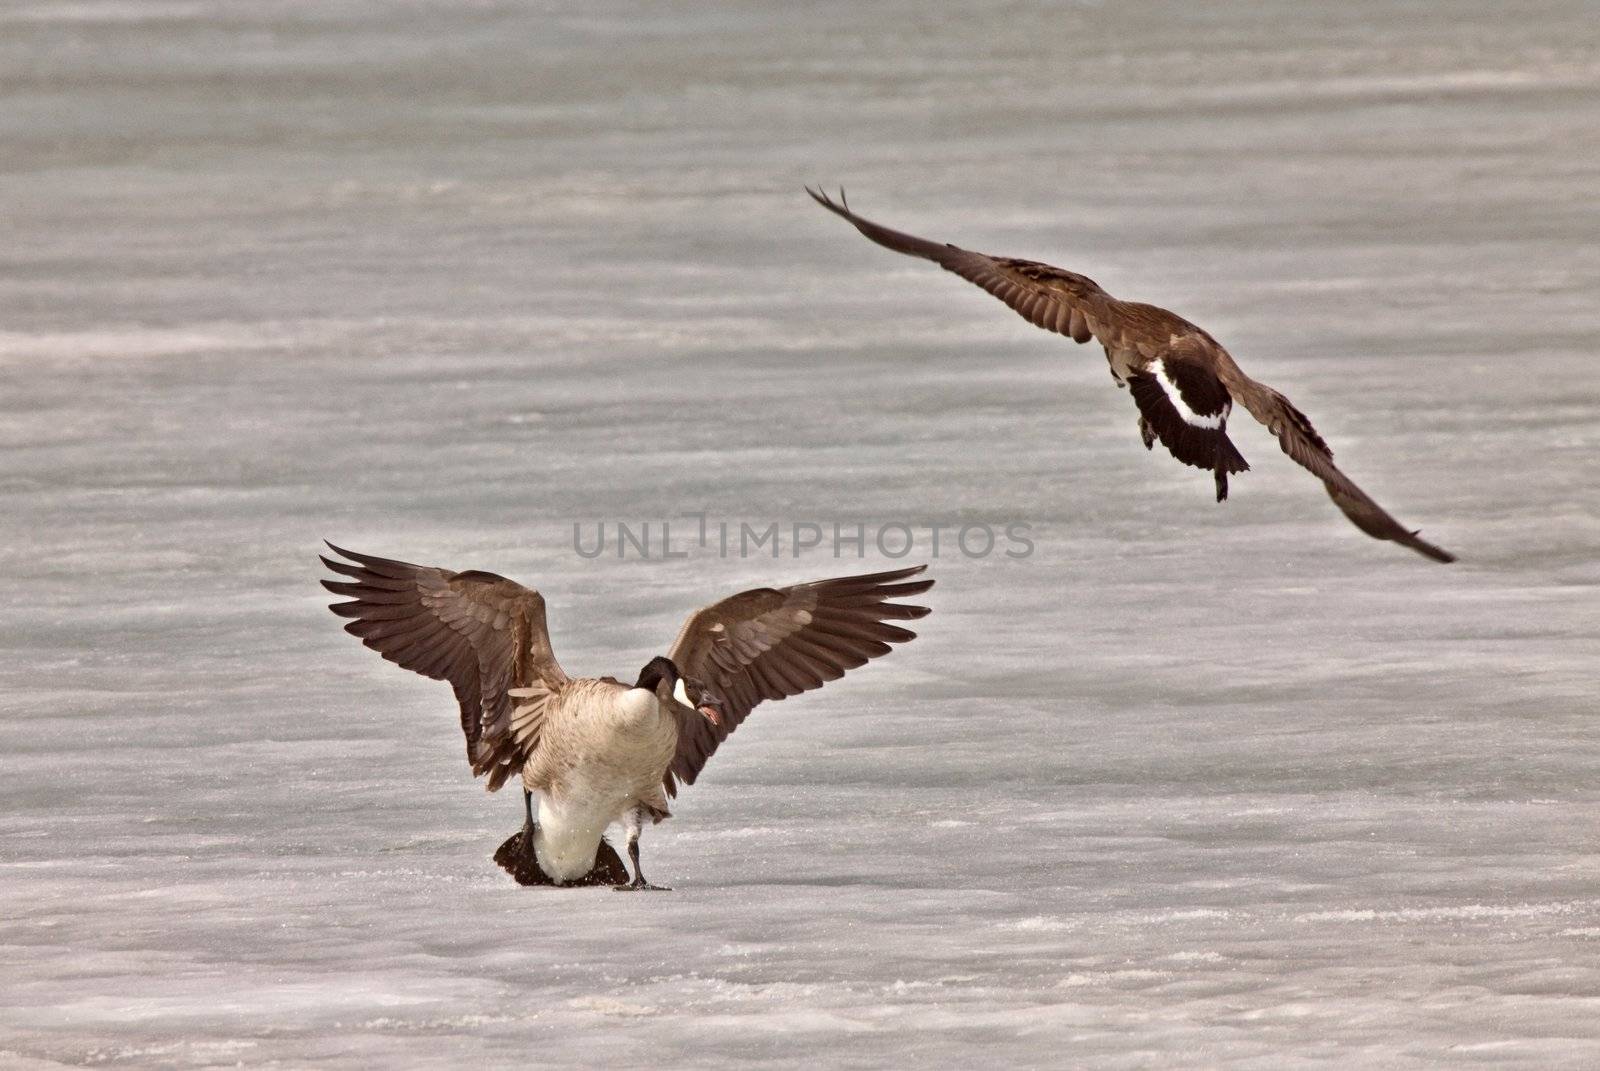 Canada Geese fighting playing on Ice by pictureguy